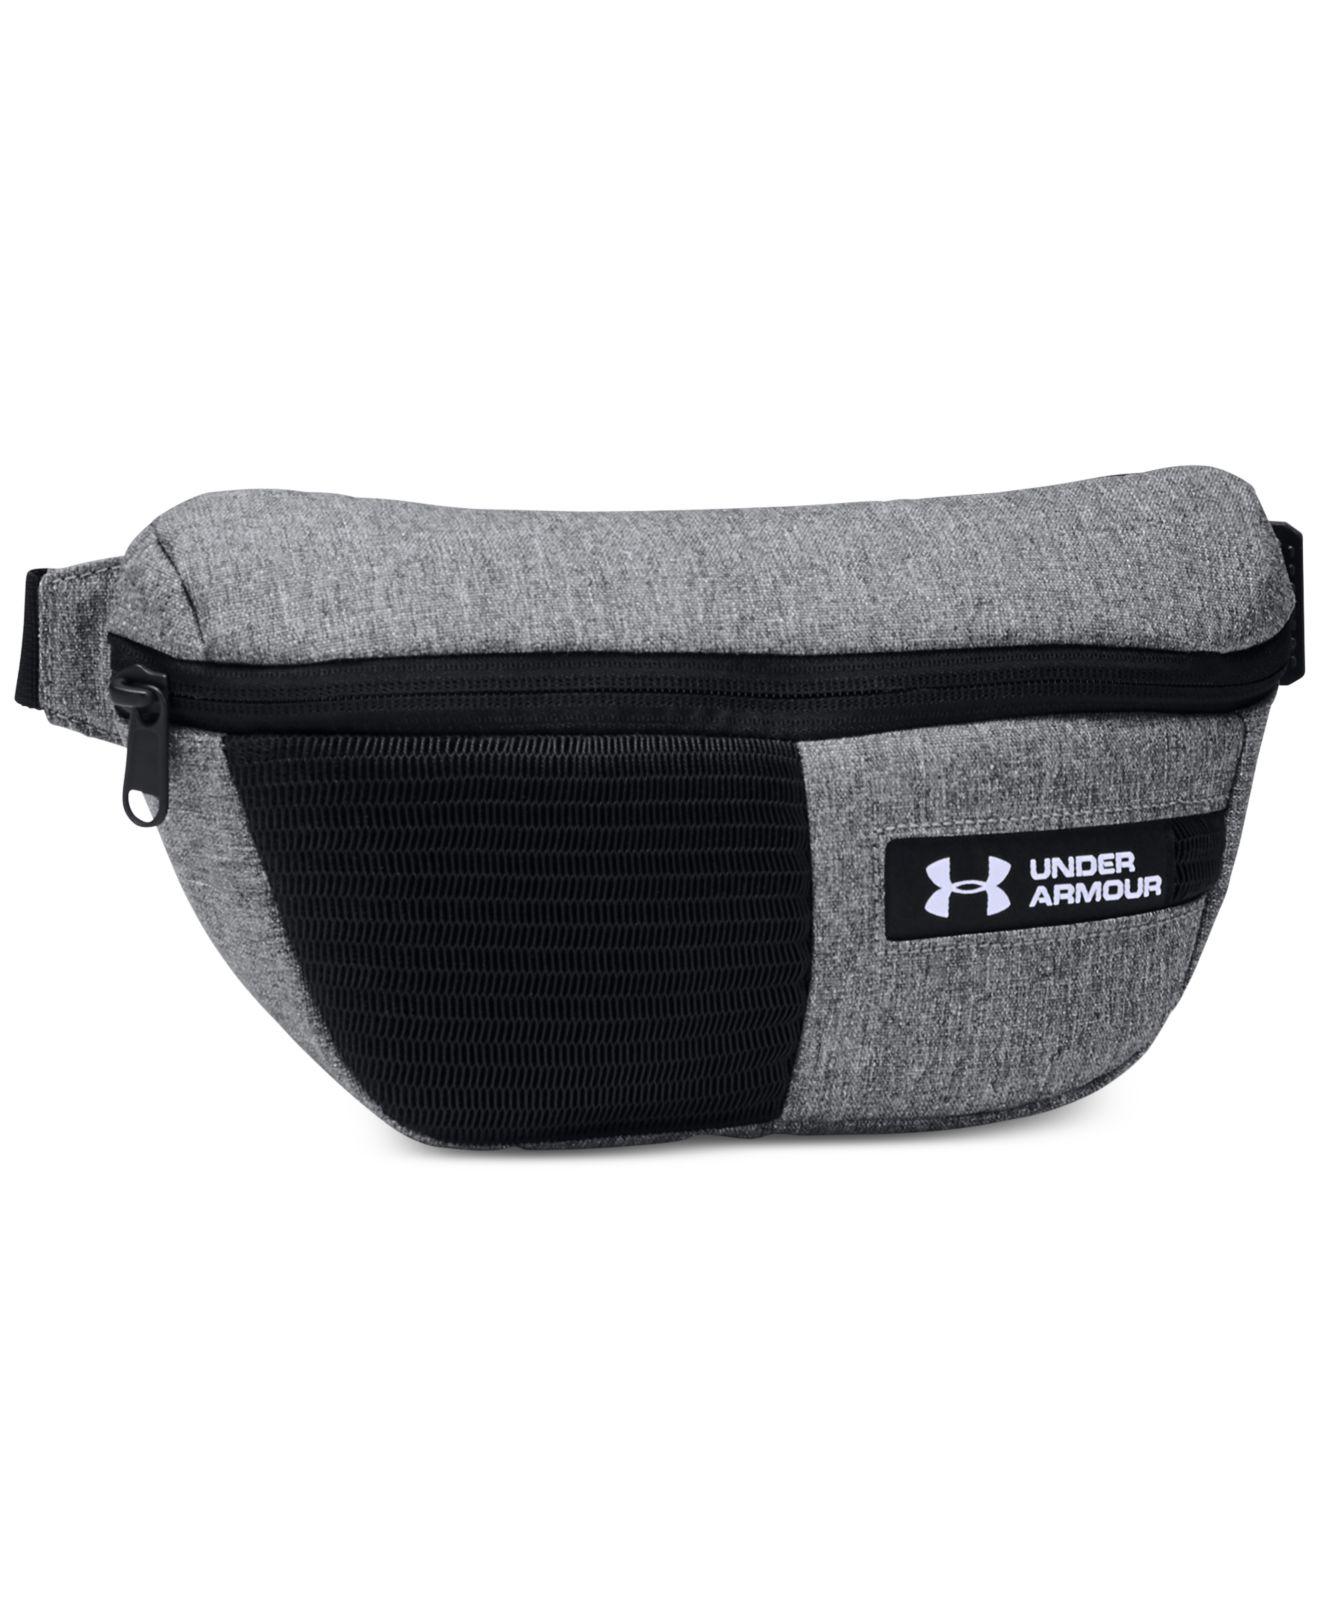 Under Armour Synthetic Waist Pack in Black - Lyst